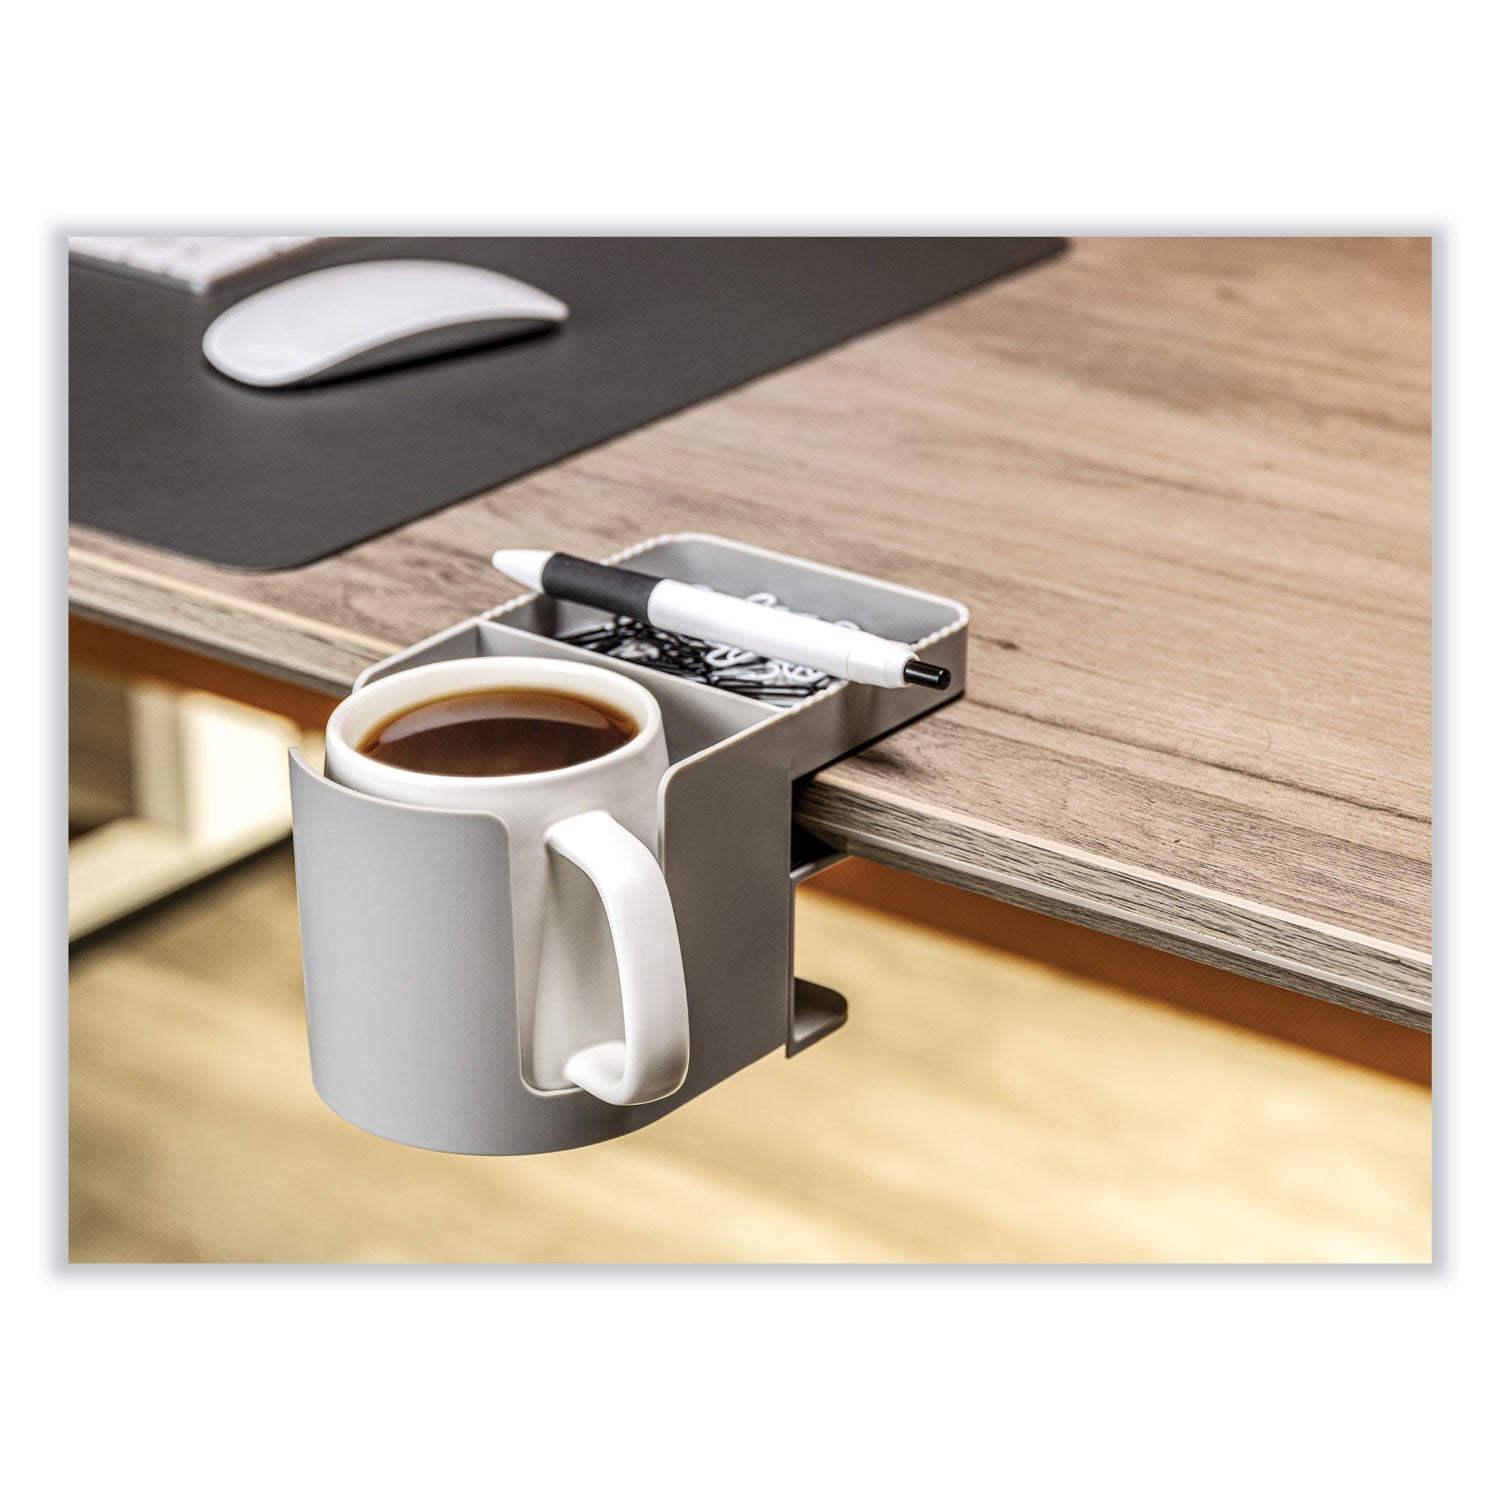 standing-desk-cup-holder-organizer-two-sections-394-x-704-x-354-gray_def400000 - 3